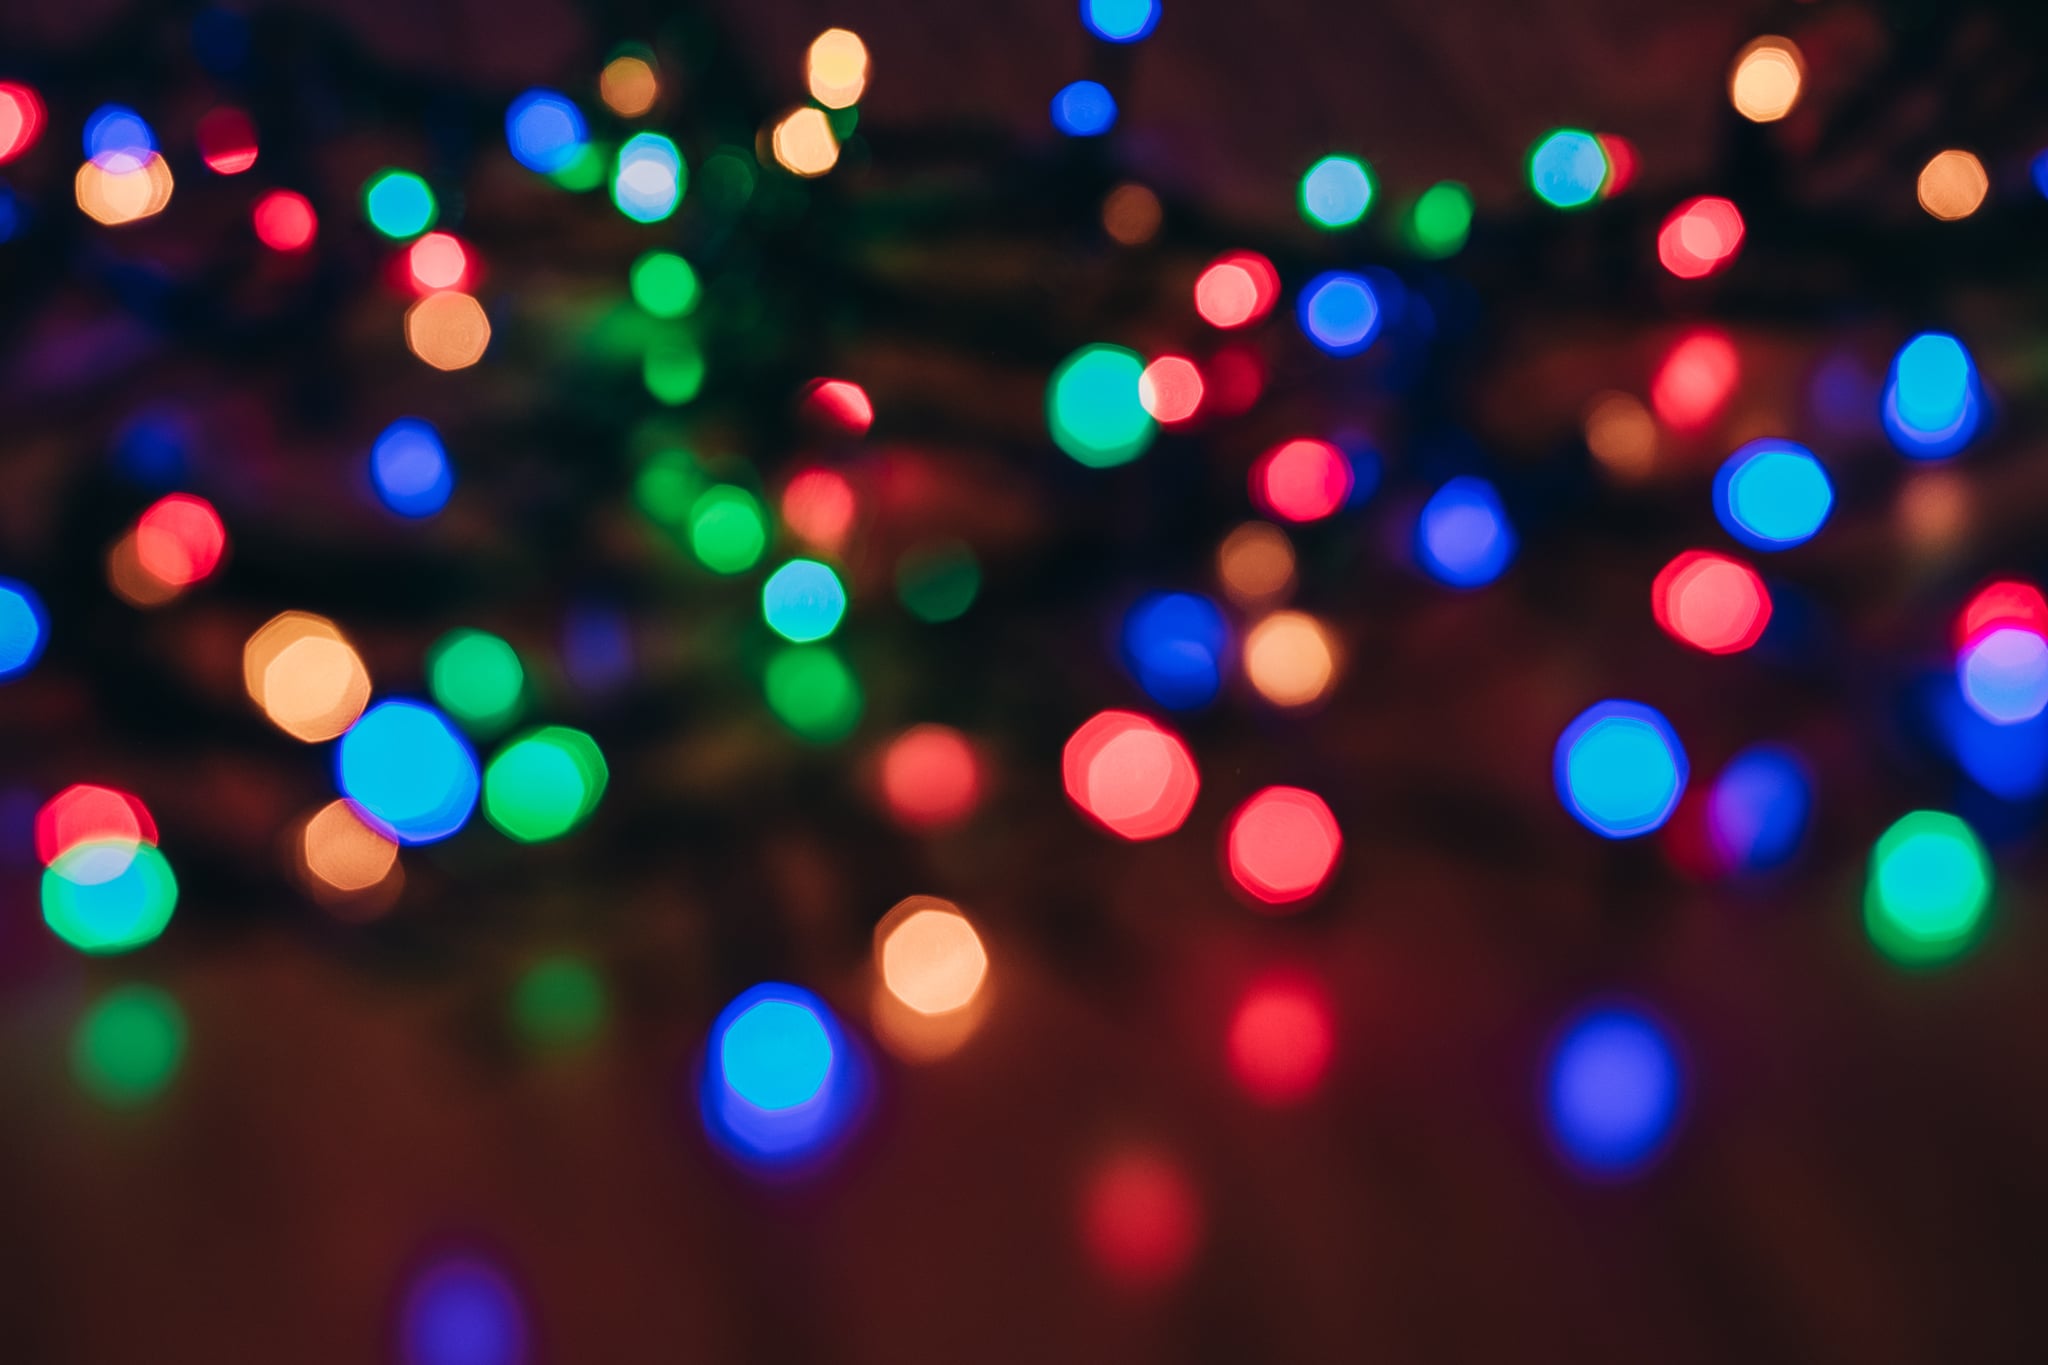 Christmas Zoom Background: Christmas Lights | 39 Christmas Zoom Backgrounds  That Even Santa Claus Himself Would Approve Of | POPSUGAR Tech Photo 6